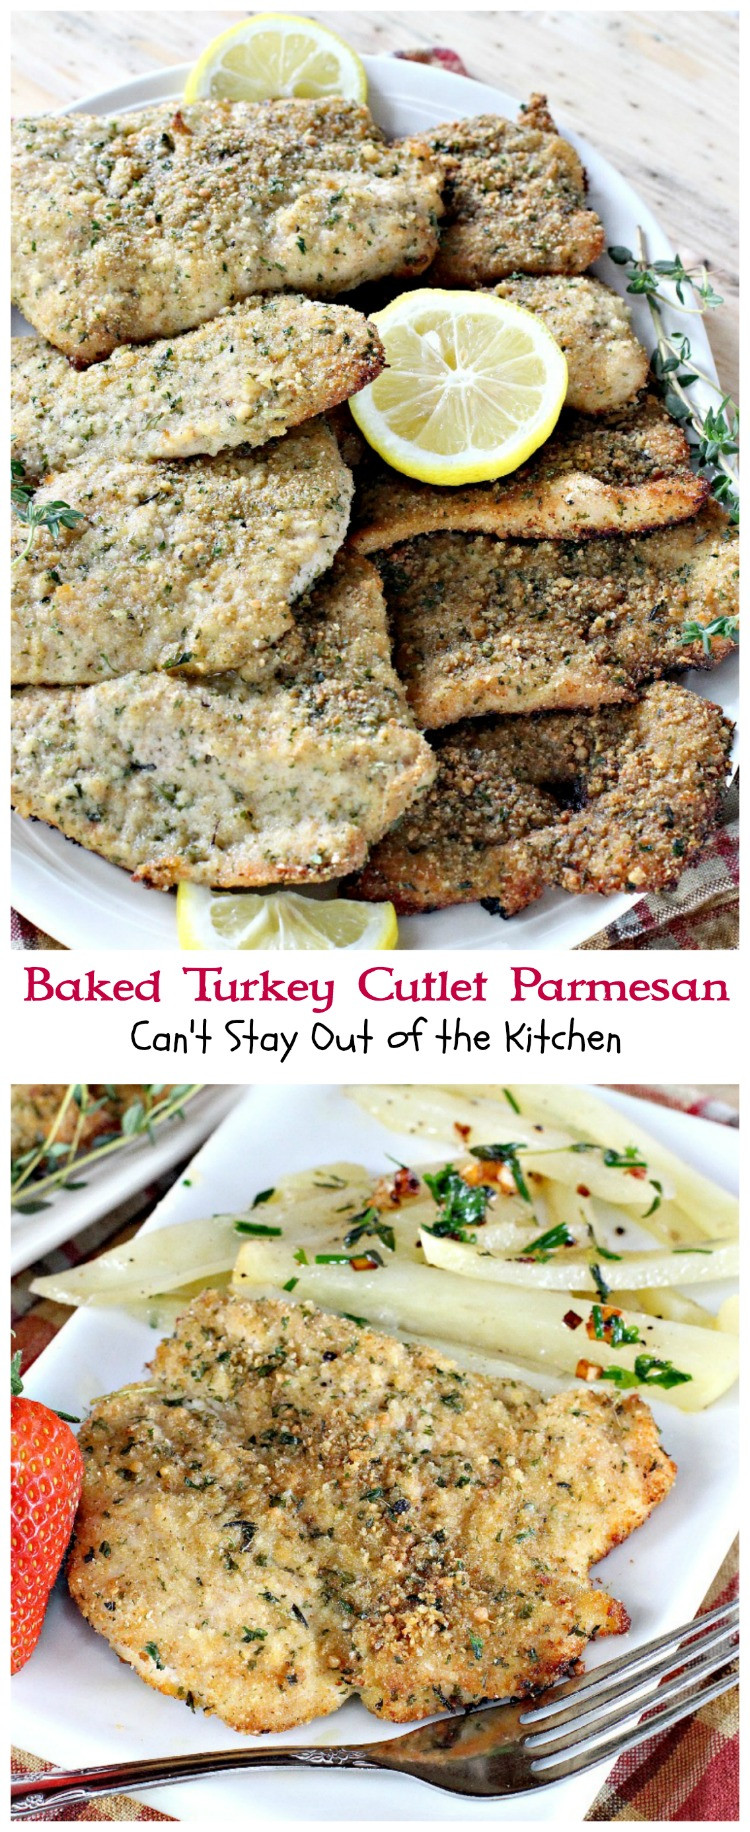 Baked Turkey Recipes For Thanksgiving
 Baked Turkey Cutlet Parmesan Can t Stay Out of the Kitchen